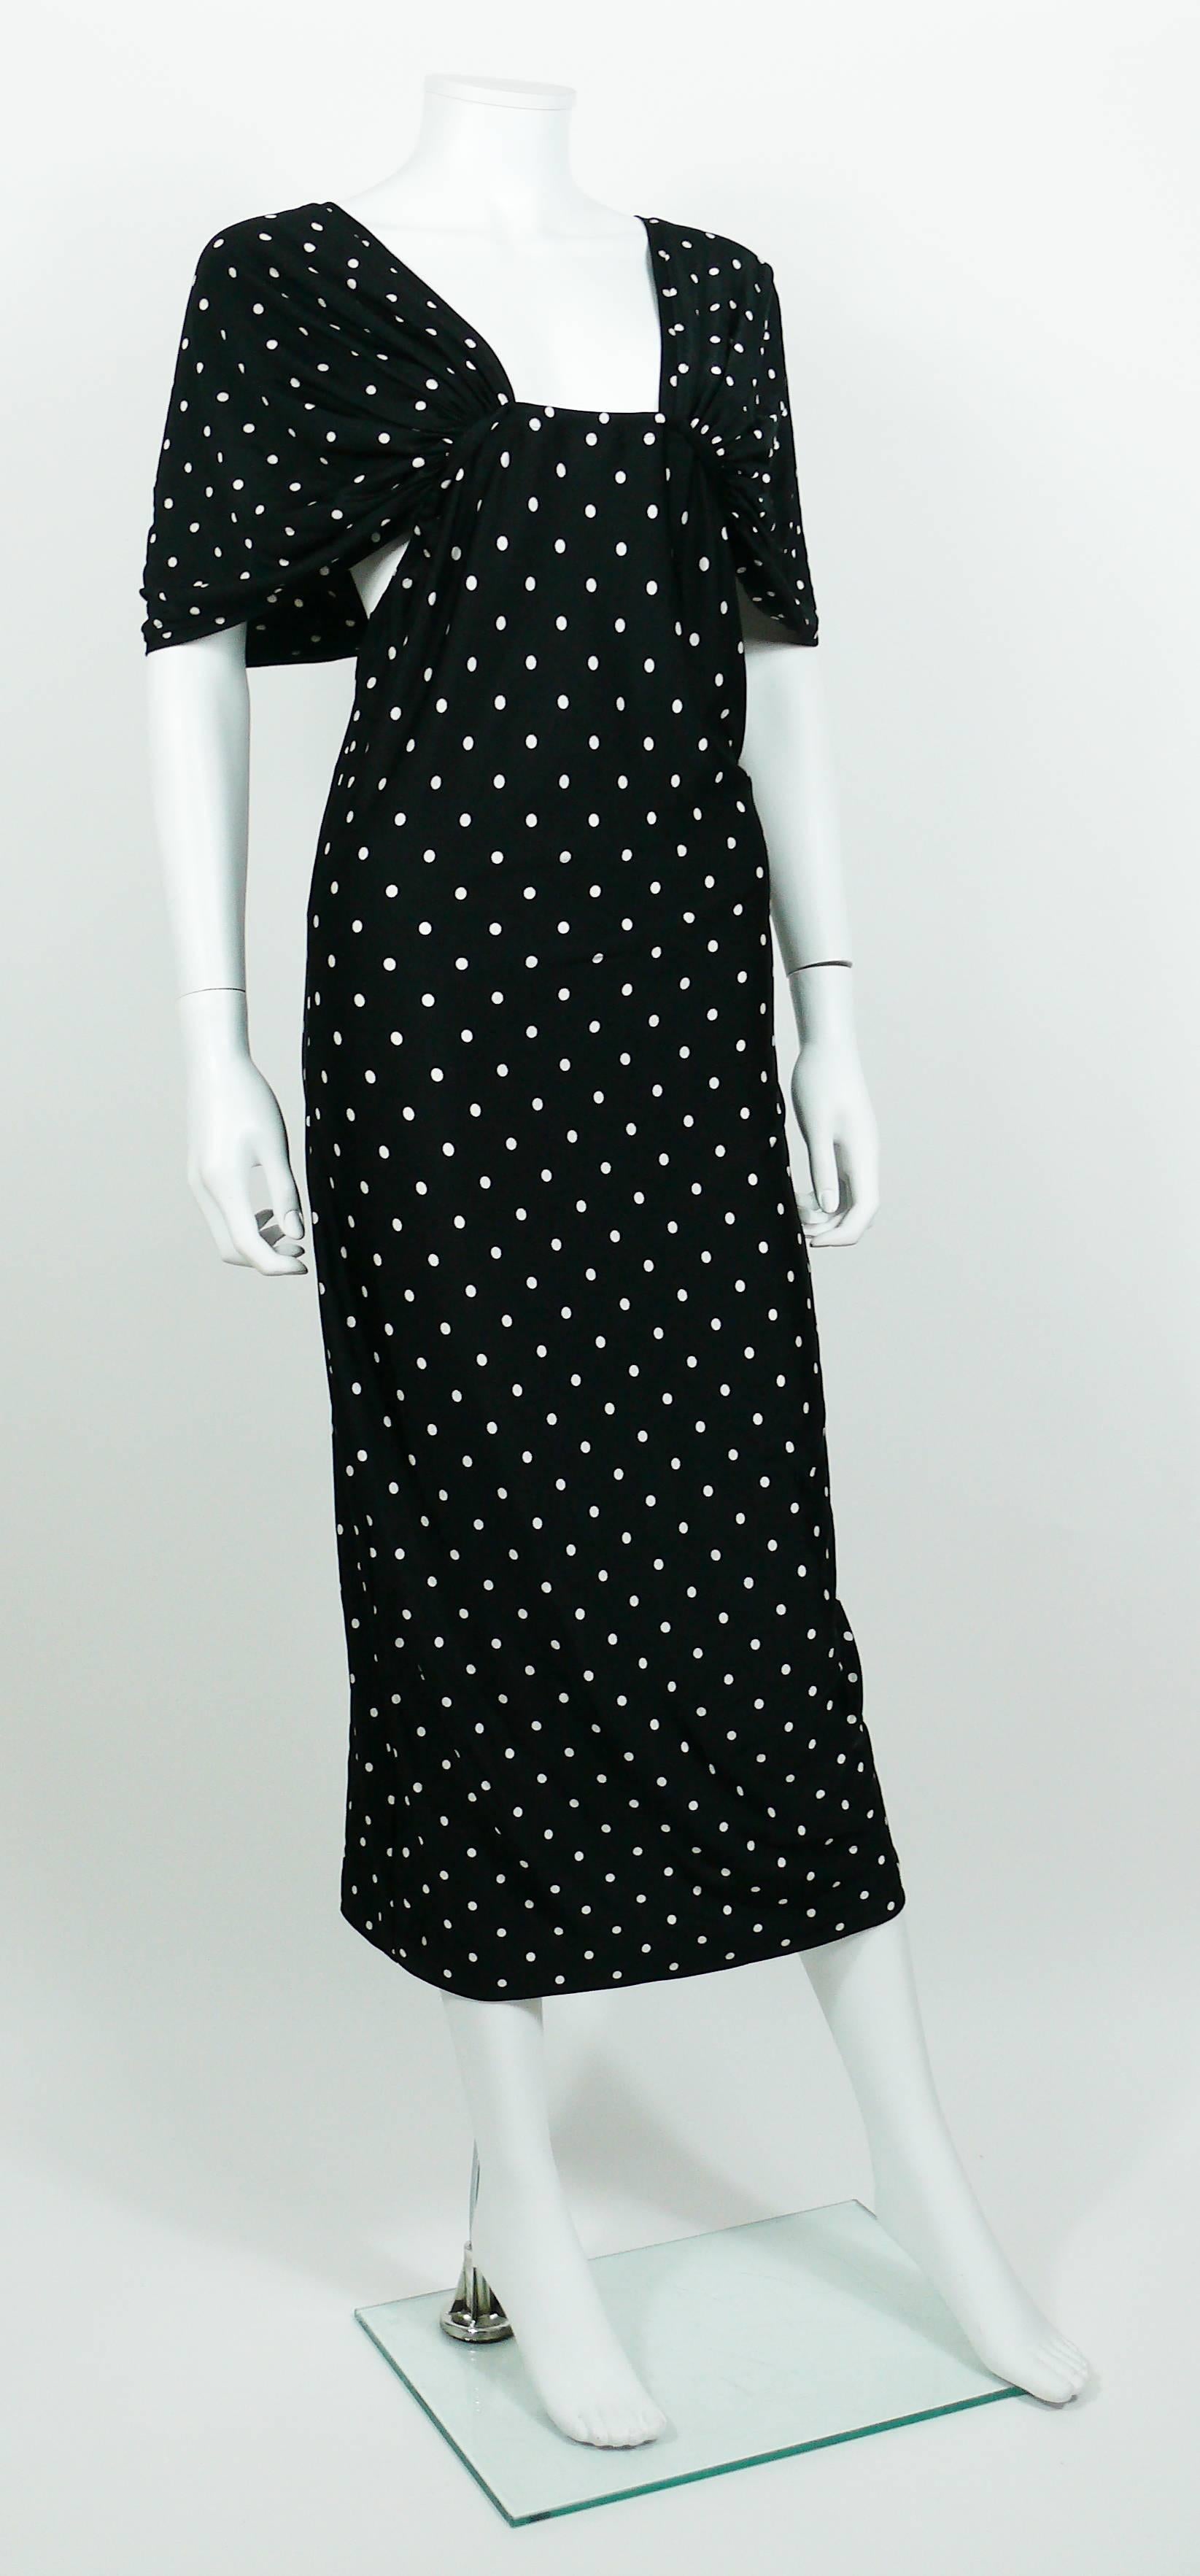 PATRICK KELLY vintage black and white polka dotted dress featuring 